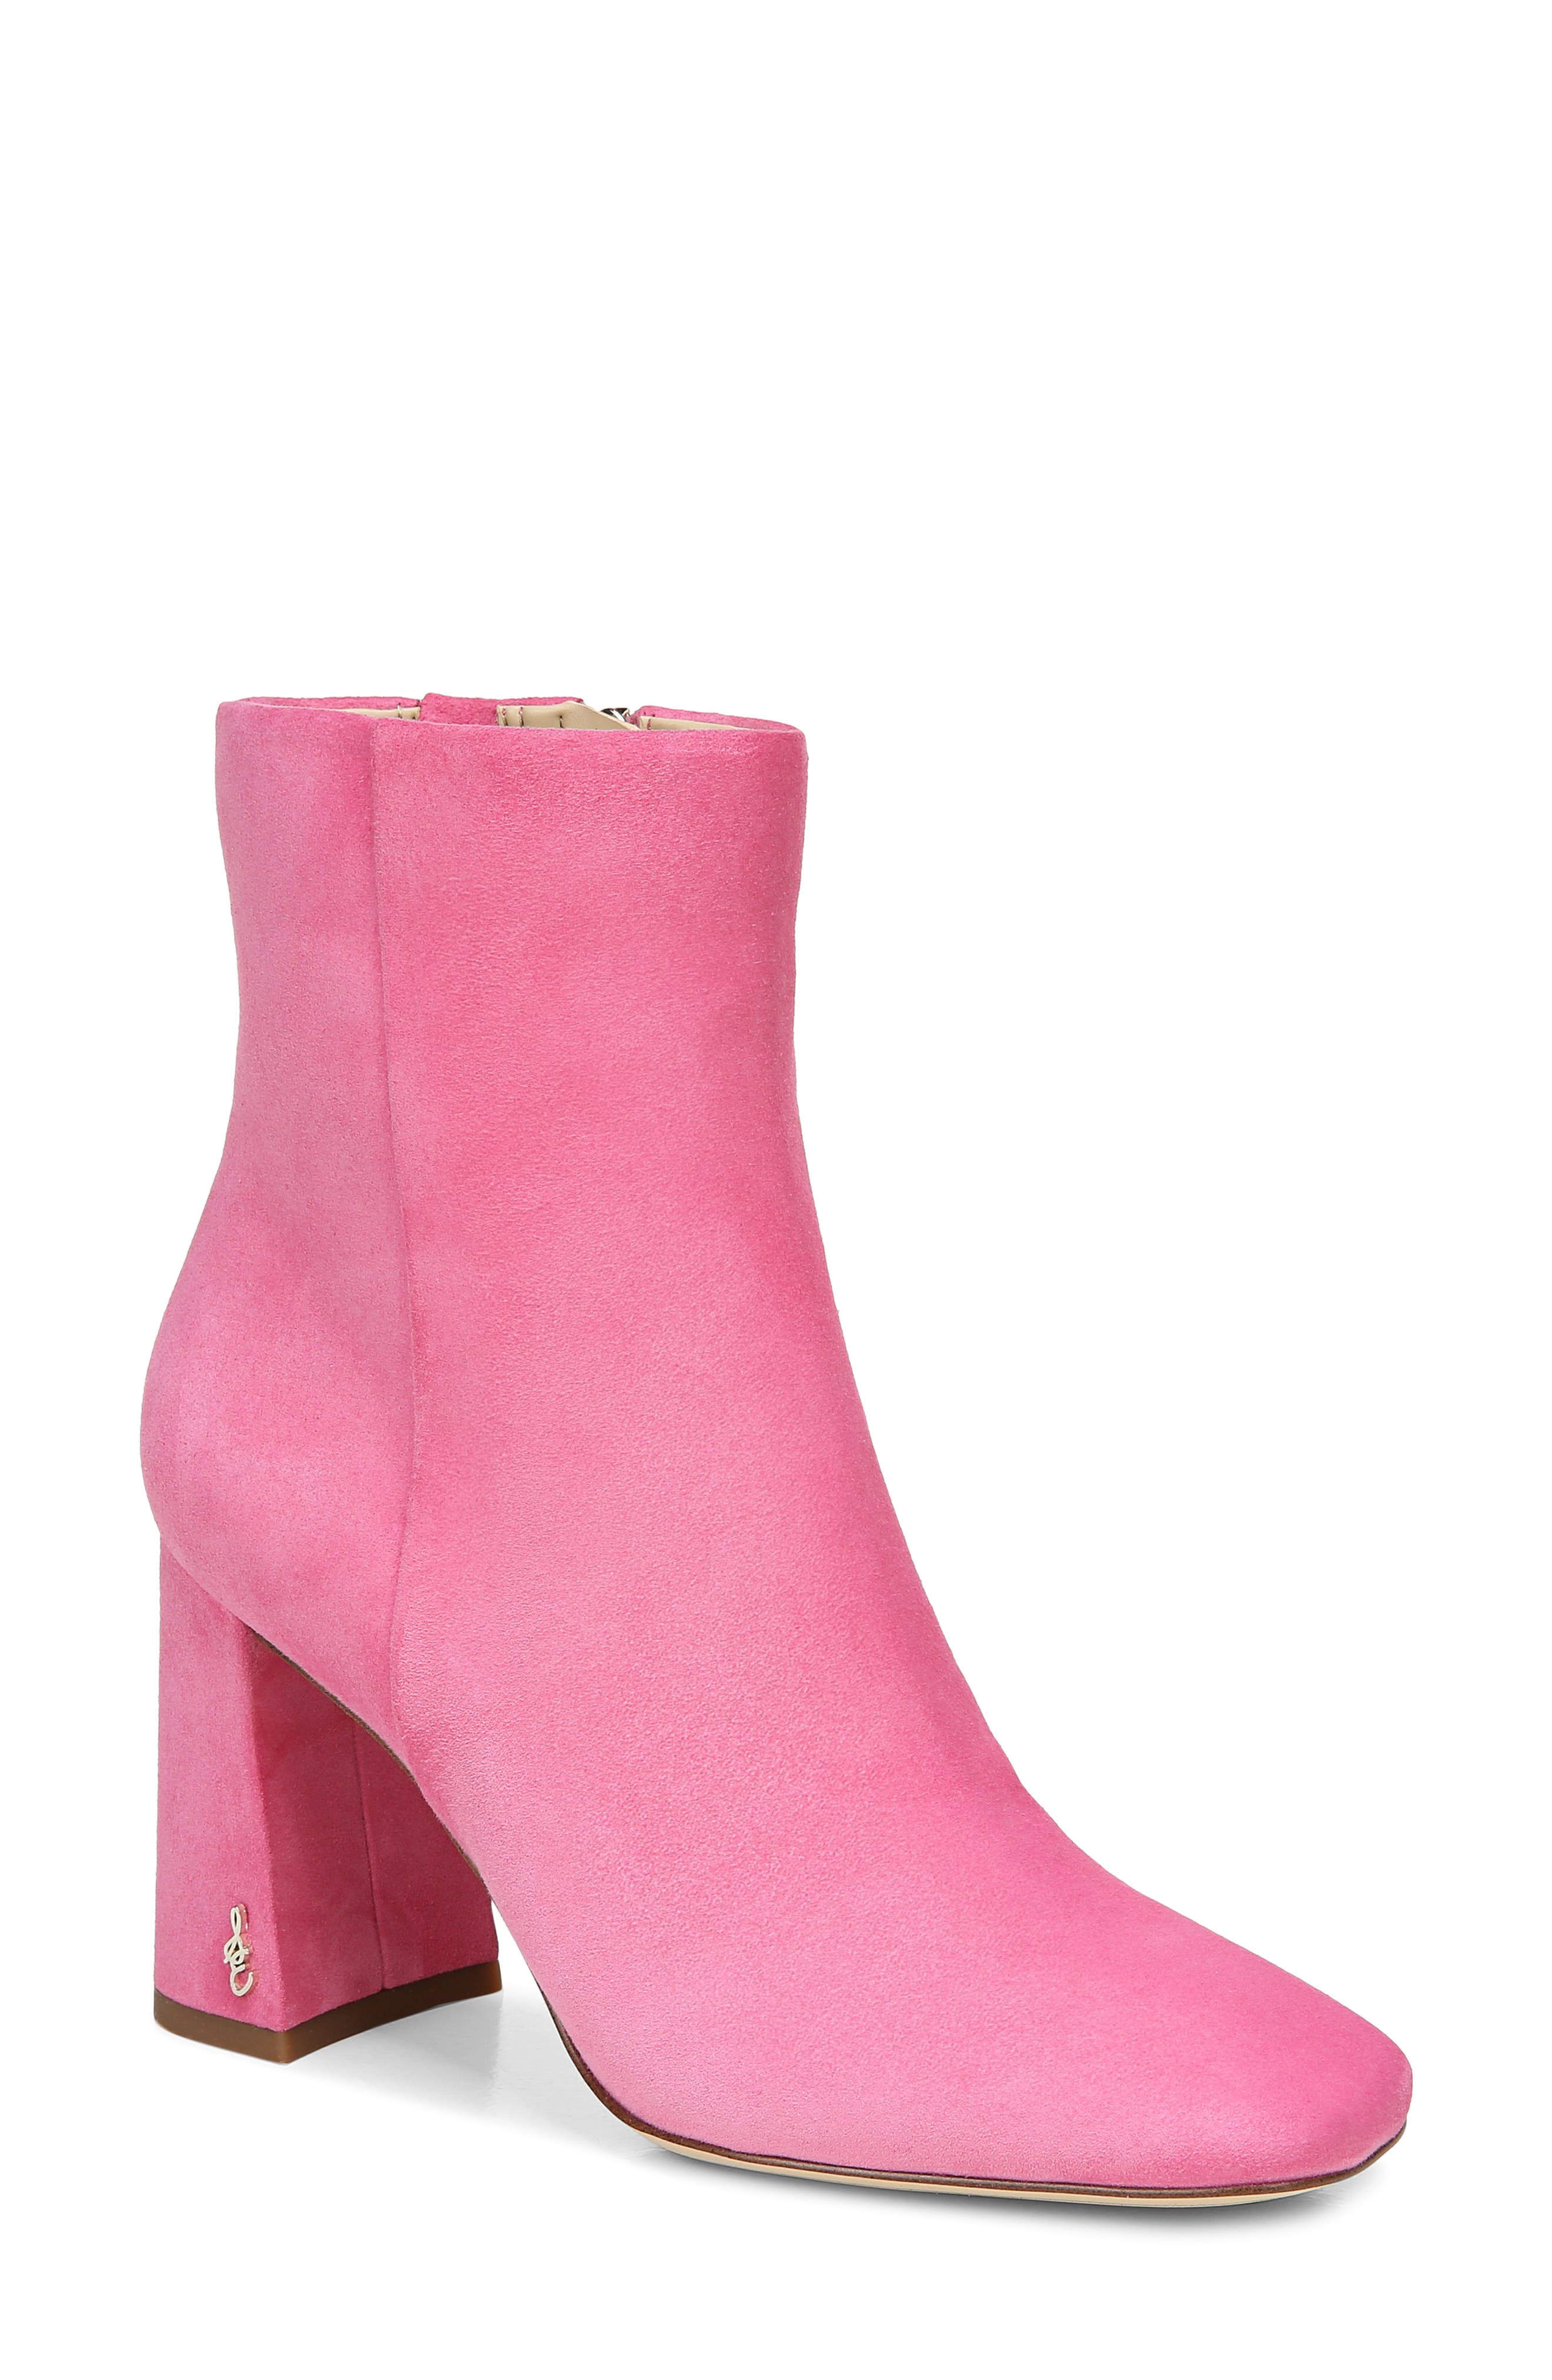 Women's Pink Booties \u0026 Ankle Boots 